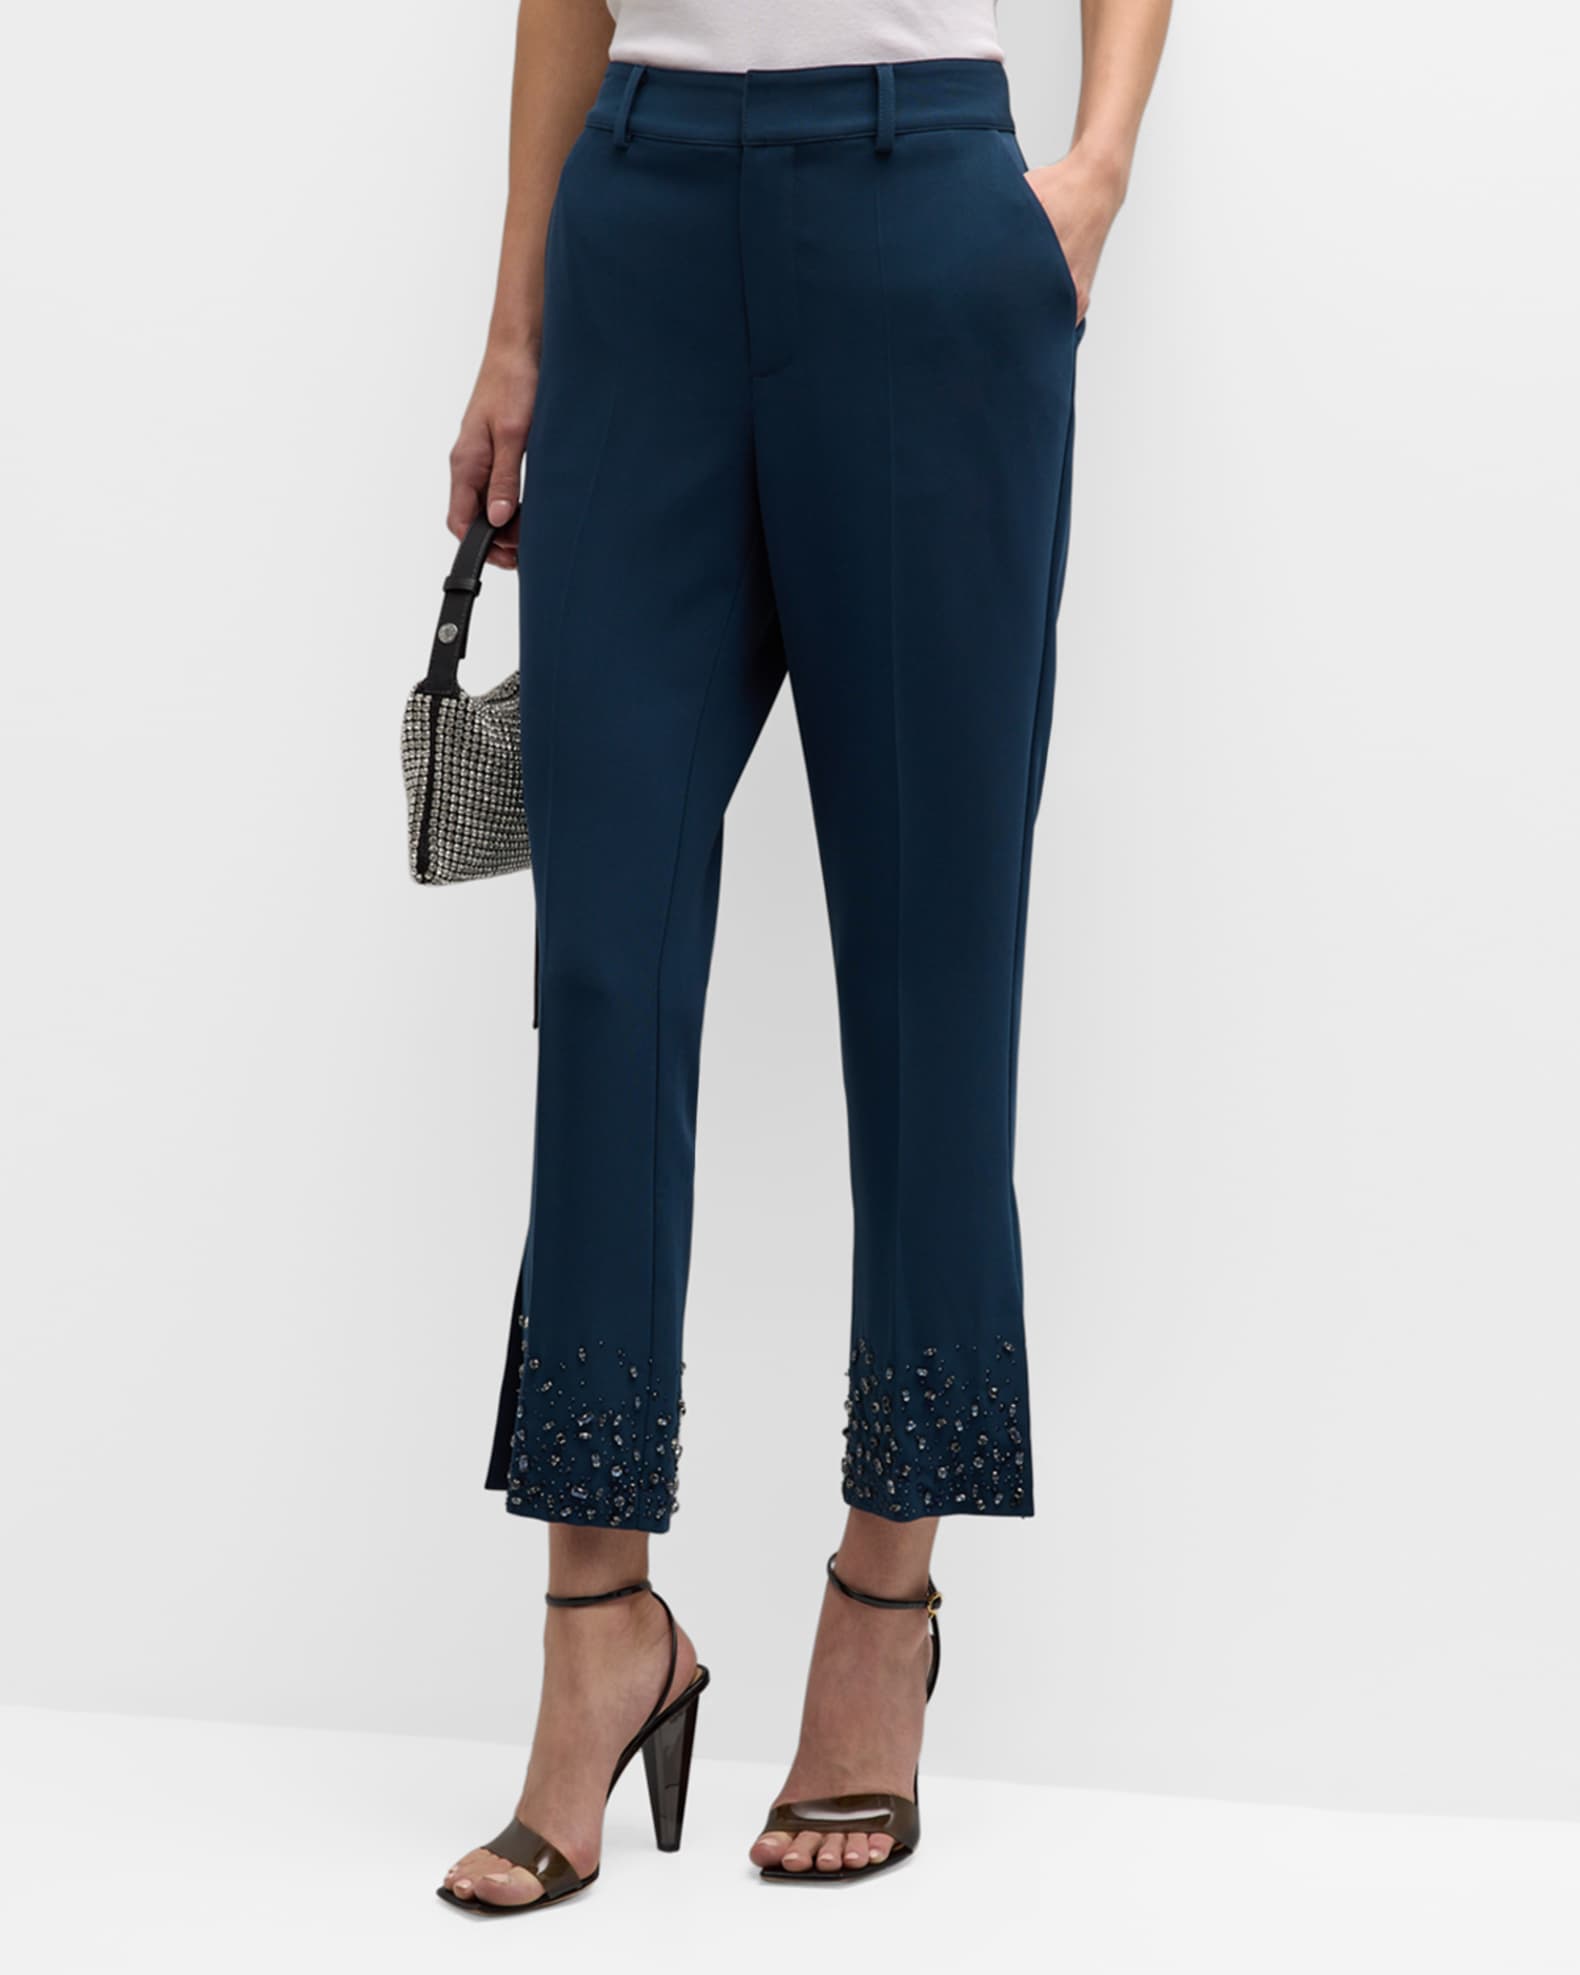 Cinq a Sept Kerry Rhinestone Crackle Cropped Pants | Neiman Marcus